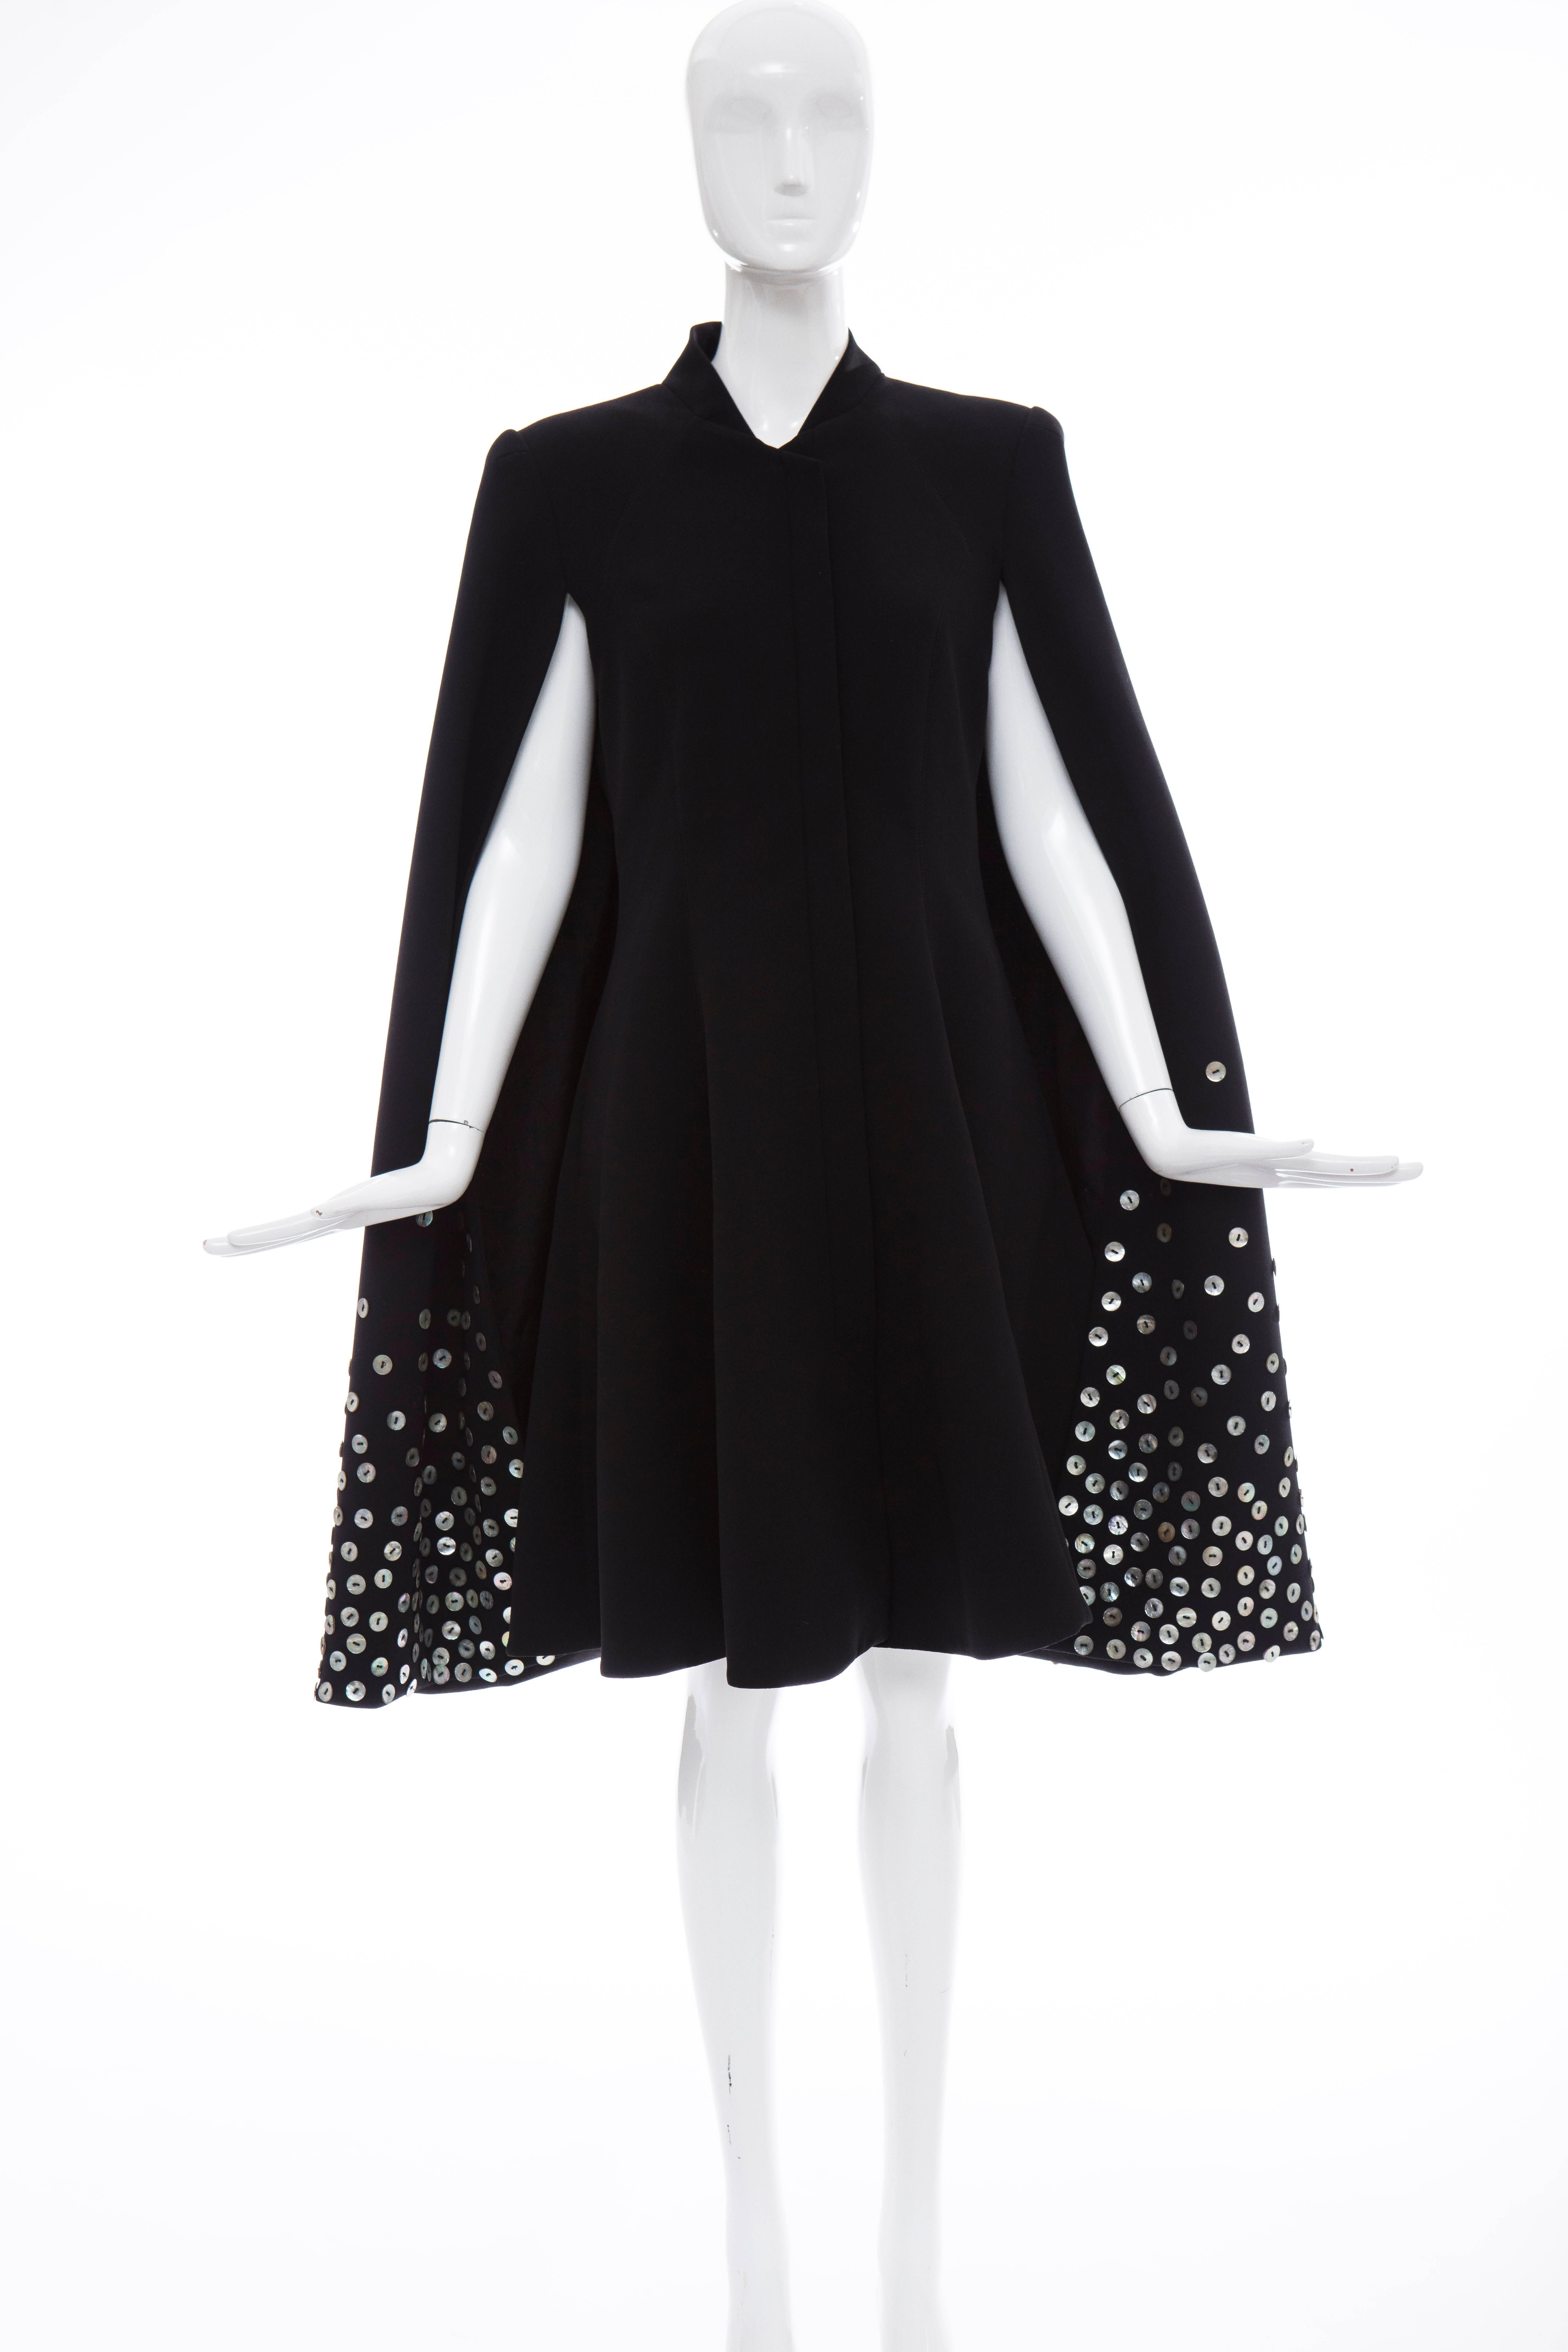 Gareth Pugh, Spring-Summer 2015 black dress with standing collar, cape overlay, mother of pearl button accents throughout, dual slit pockets at sides and concealed zip closure at front. 

GB. 12
US. 10
IT. 44

Bust: 36, Waist 32, Hip 48, Length